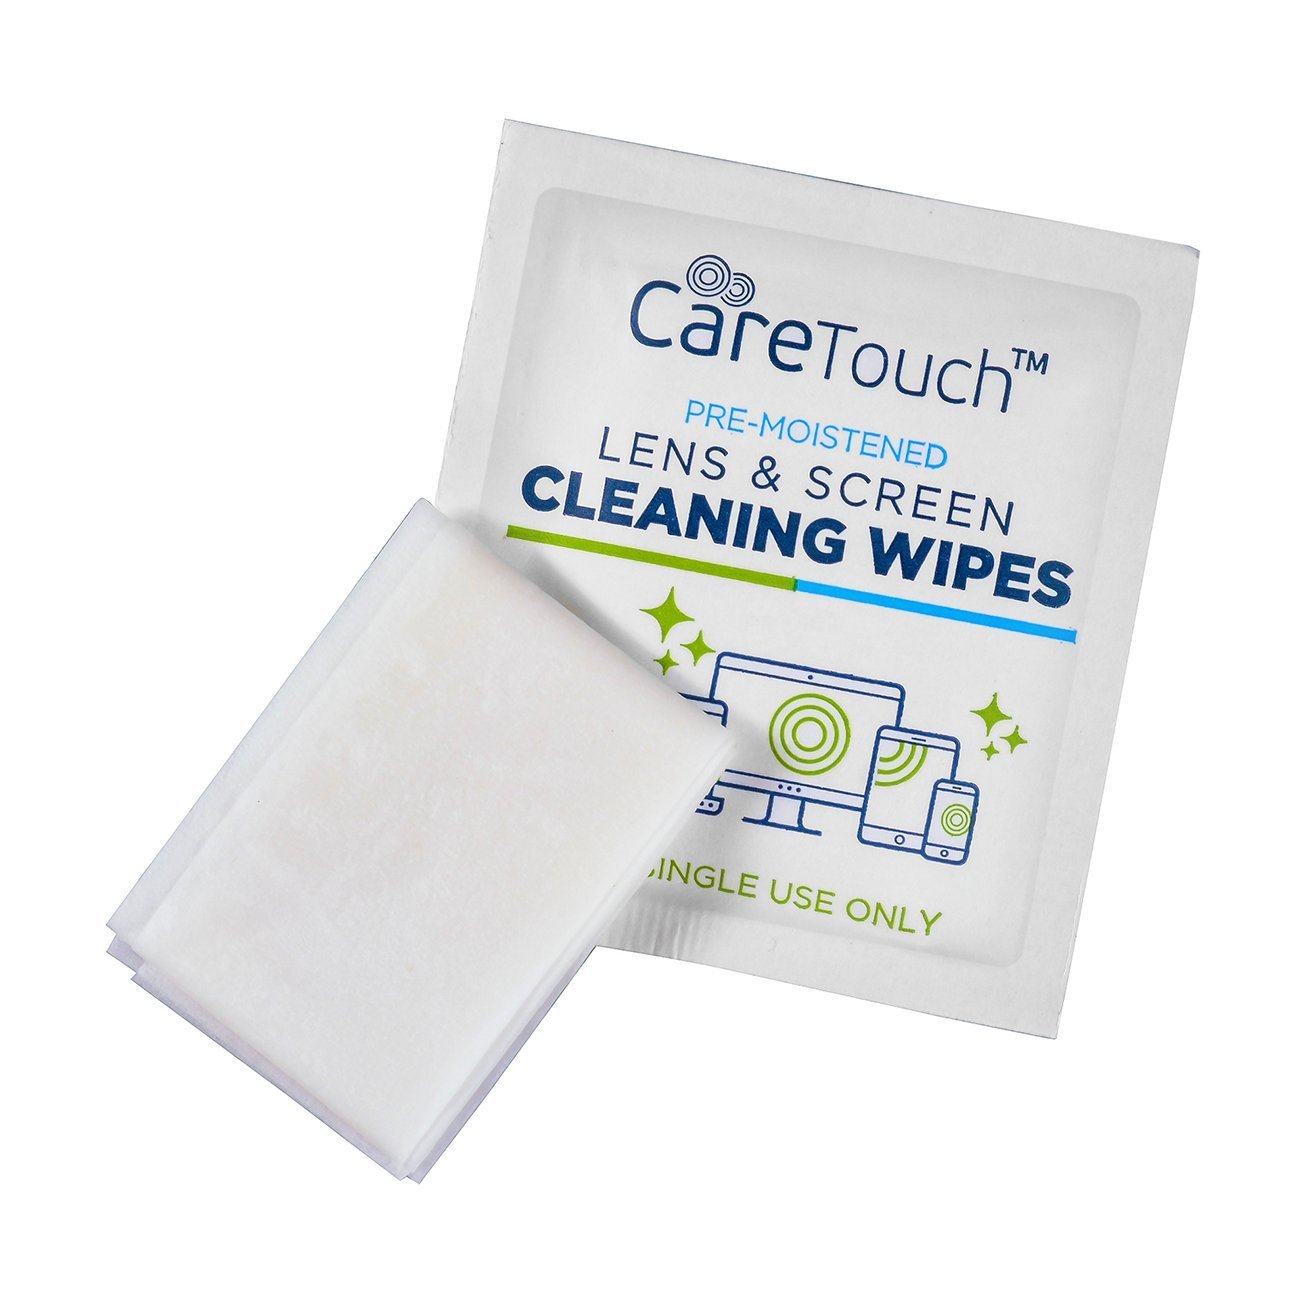 caretouch-cleaning-wipes.jpg?itok=FDax-R